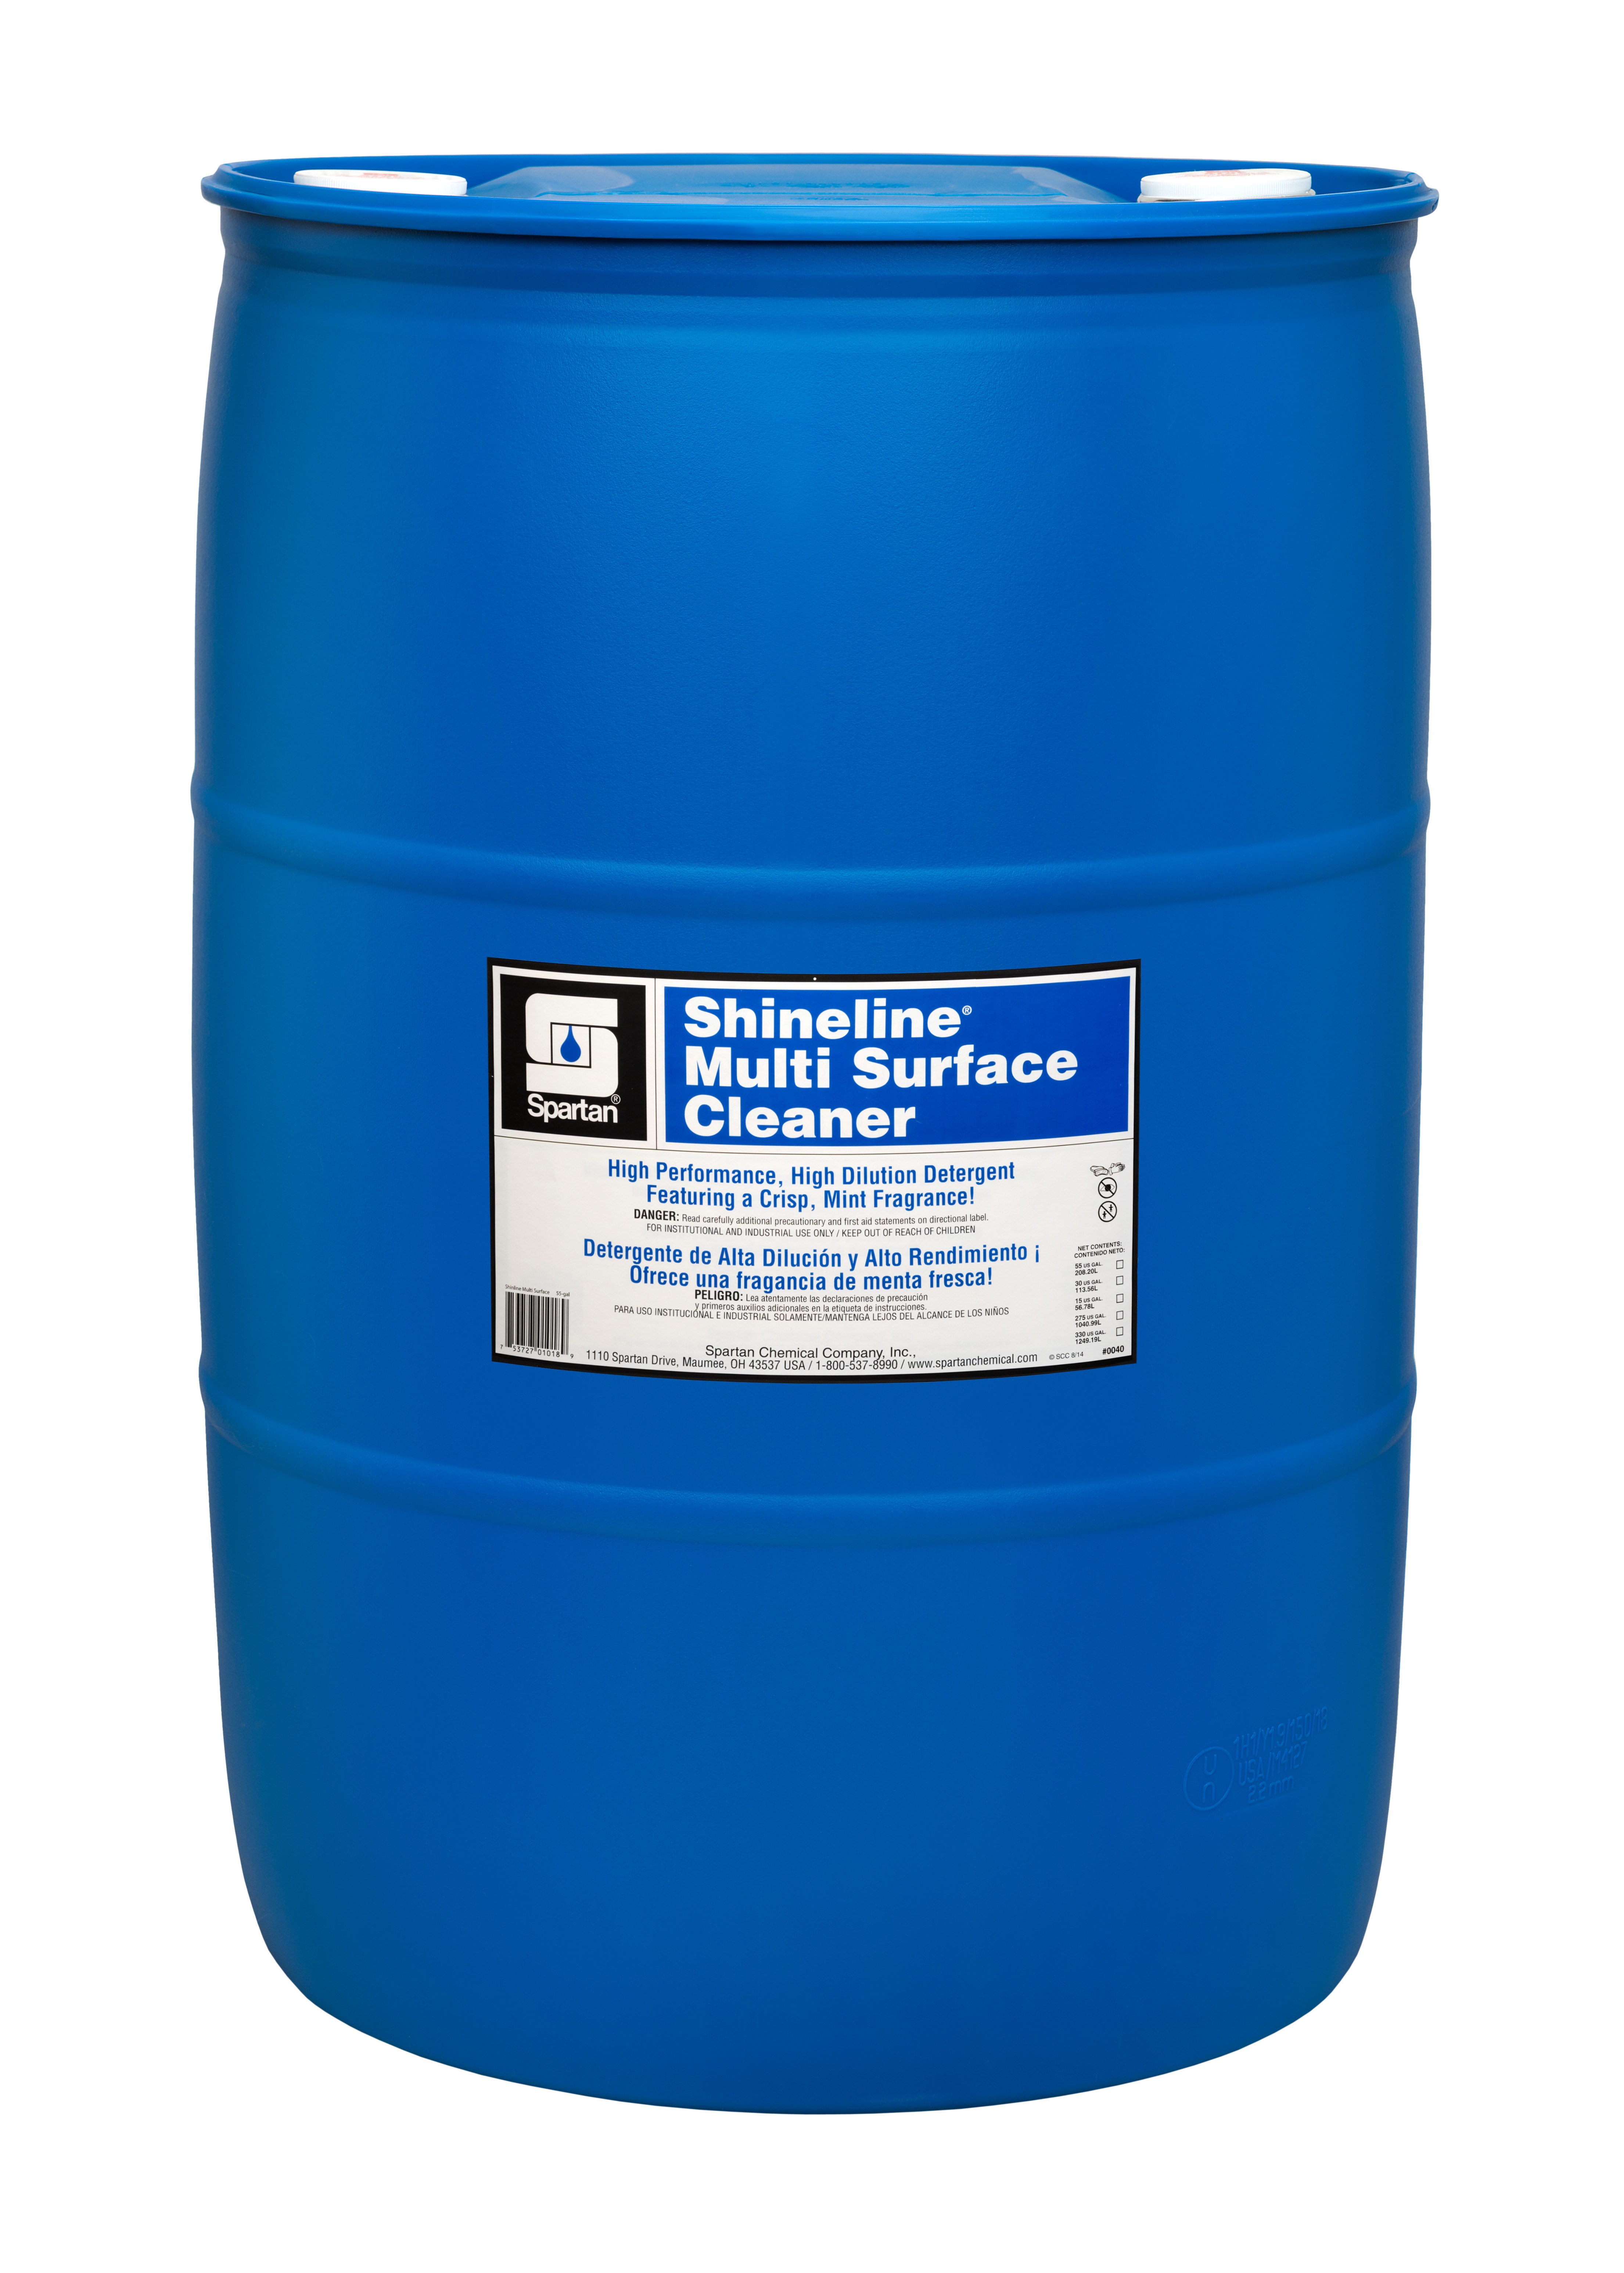 Spartan Chemical Company Shineline Multi Surface Cleaner, 55 GAL DRUM